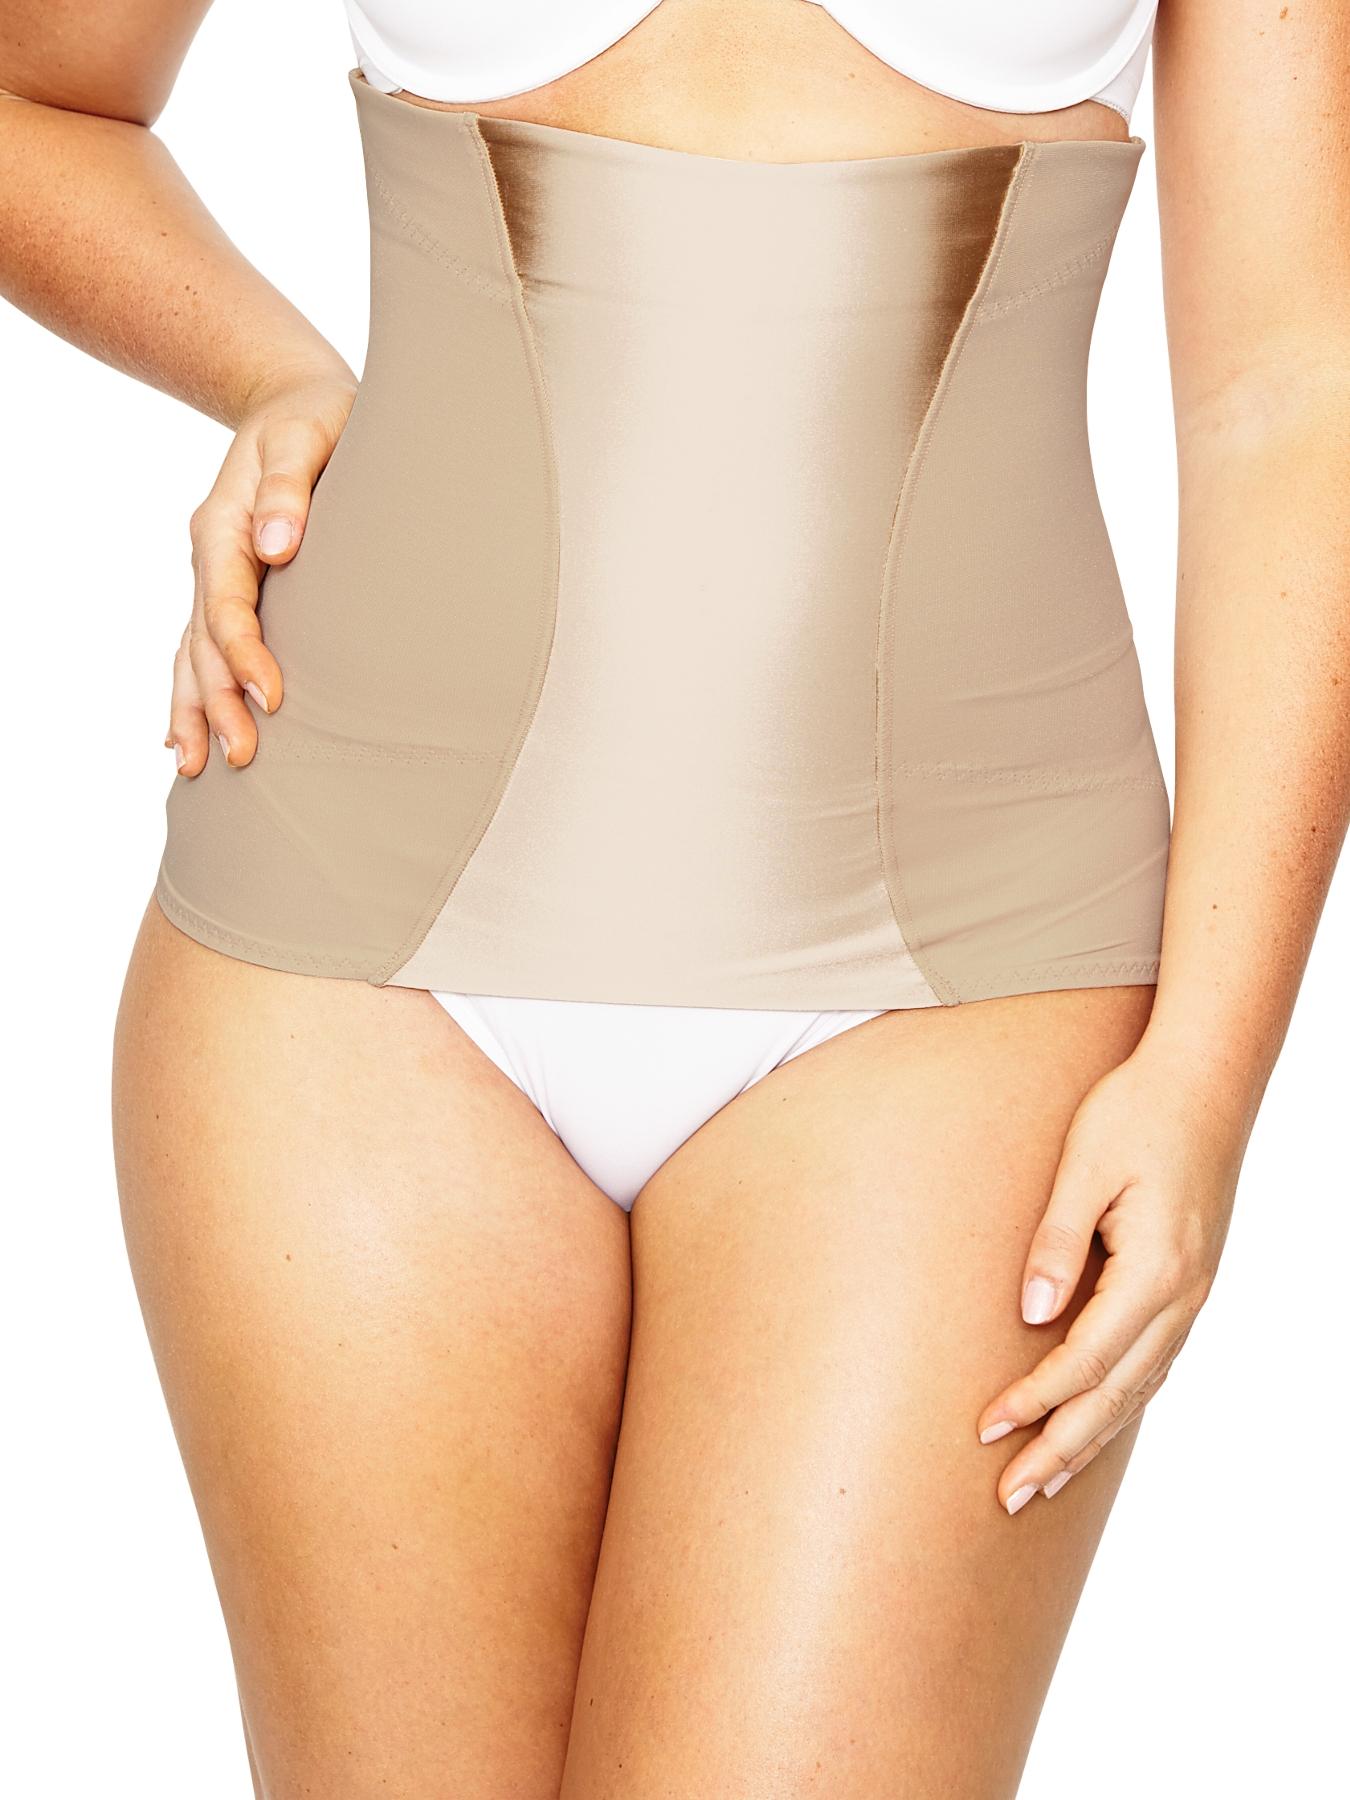 Flexees by Maidenform Women's 360 Degrees of Slimming Firm Control